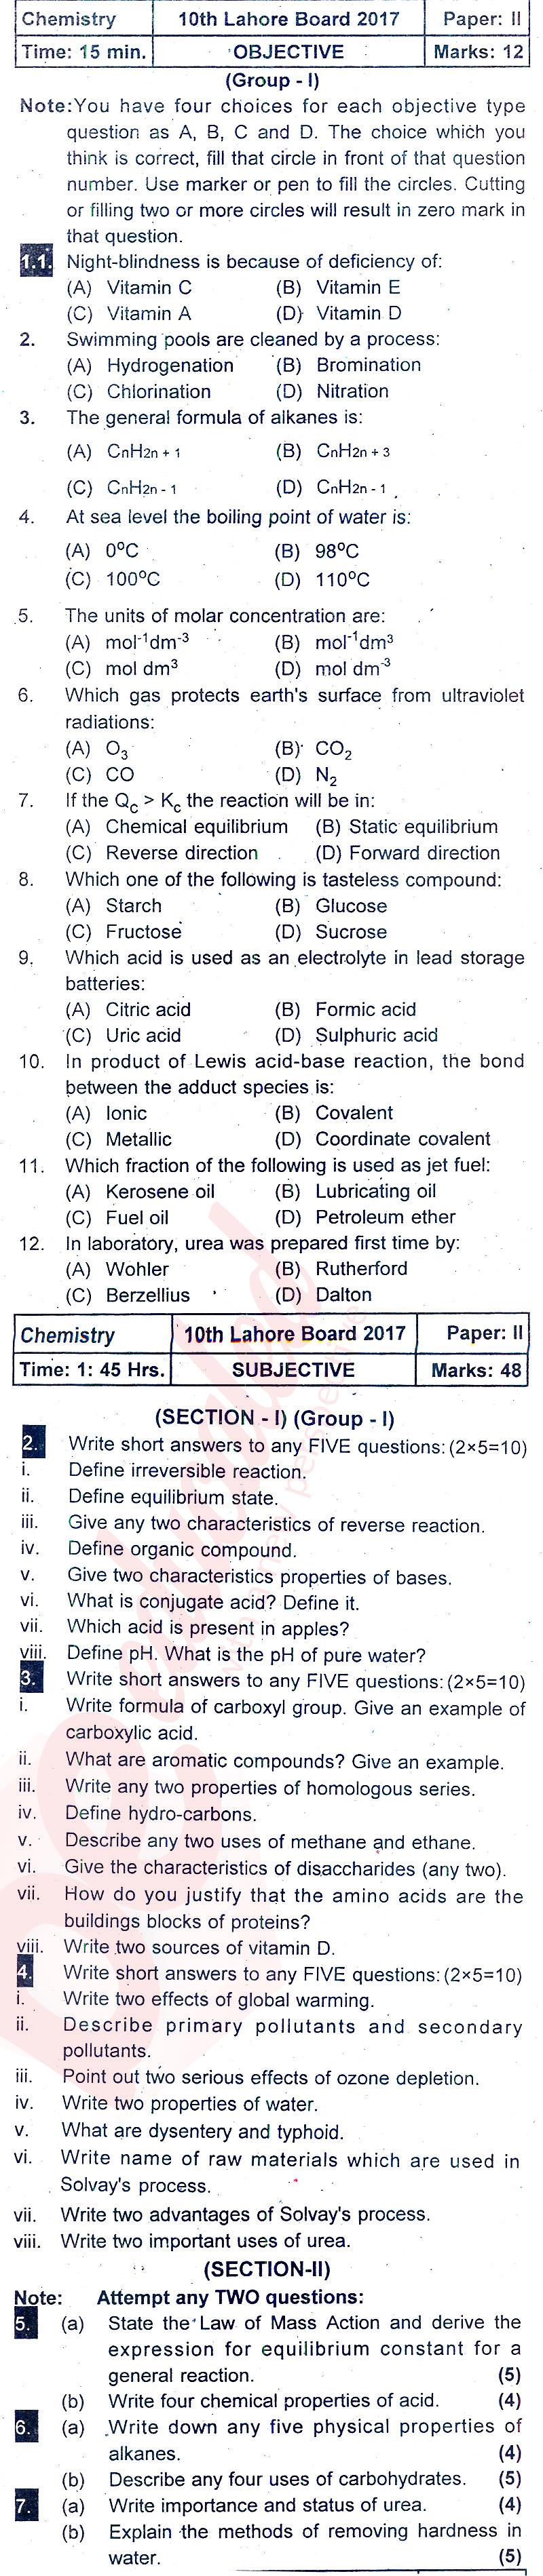 Chemistry 10th class Past Paper Group 1 BISE Lahore 2017